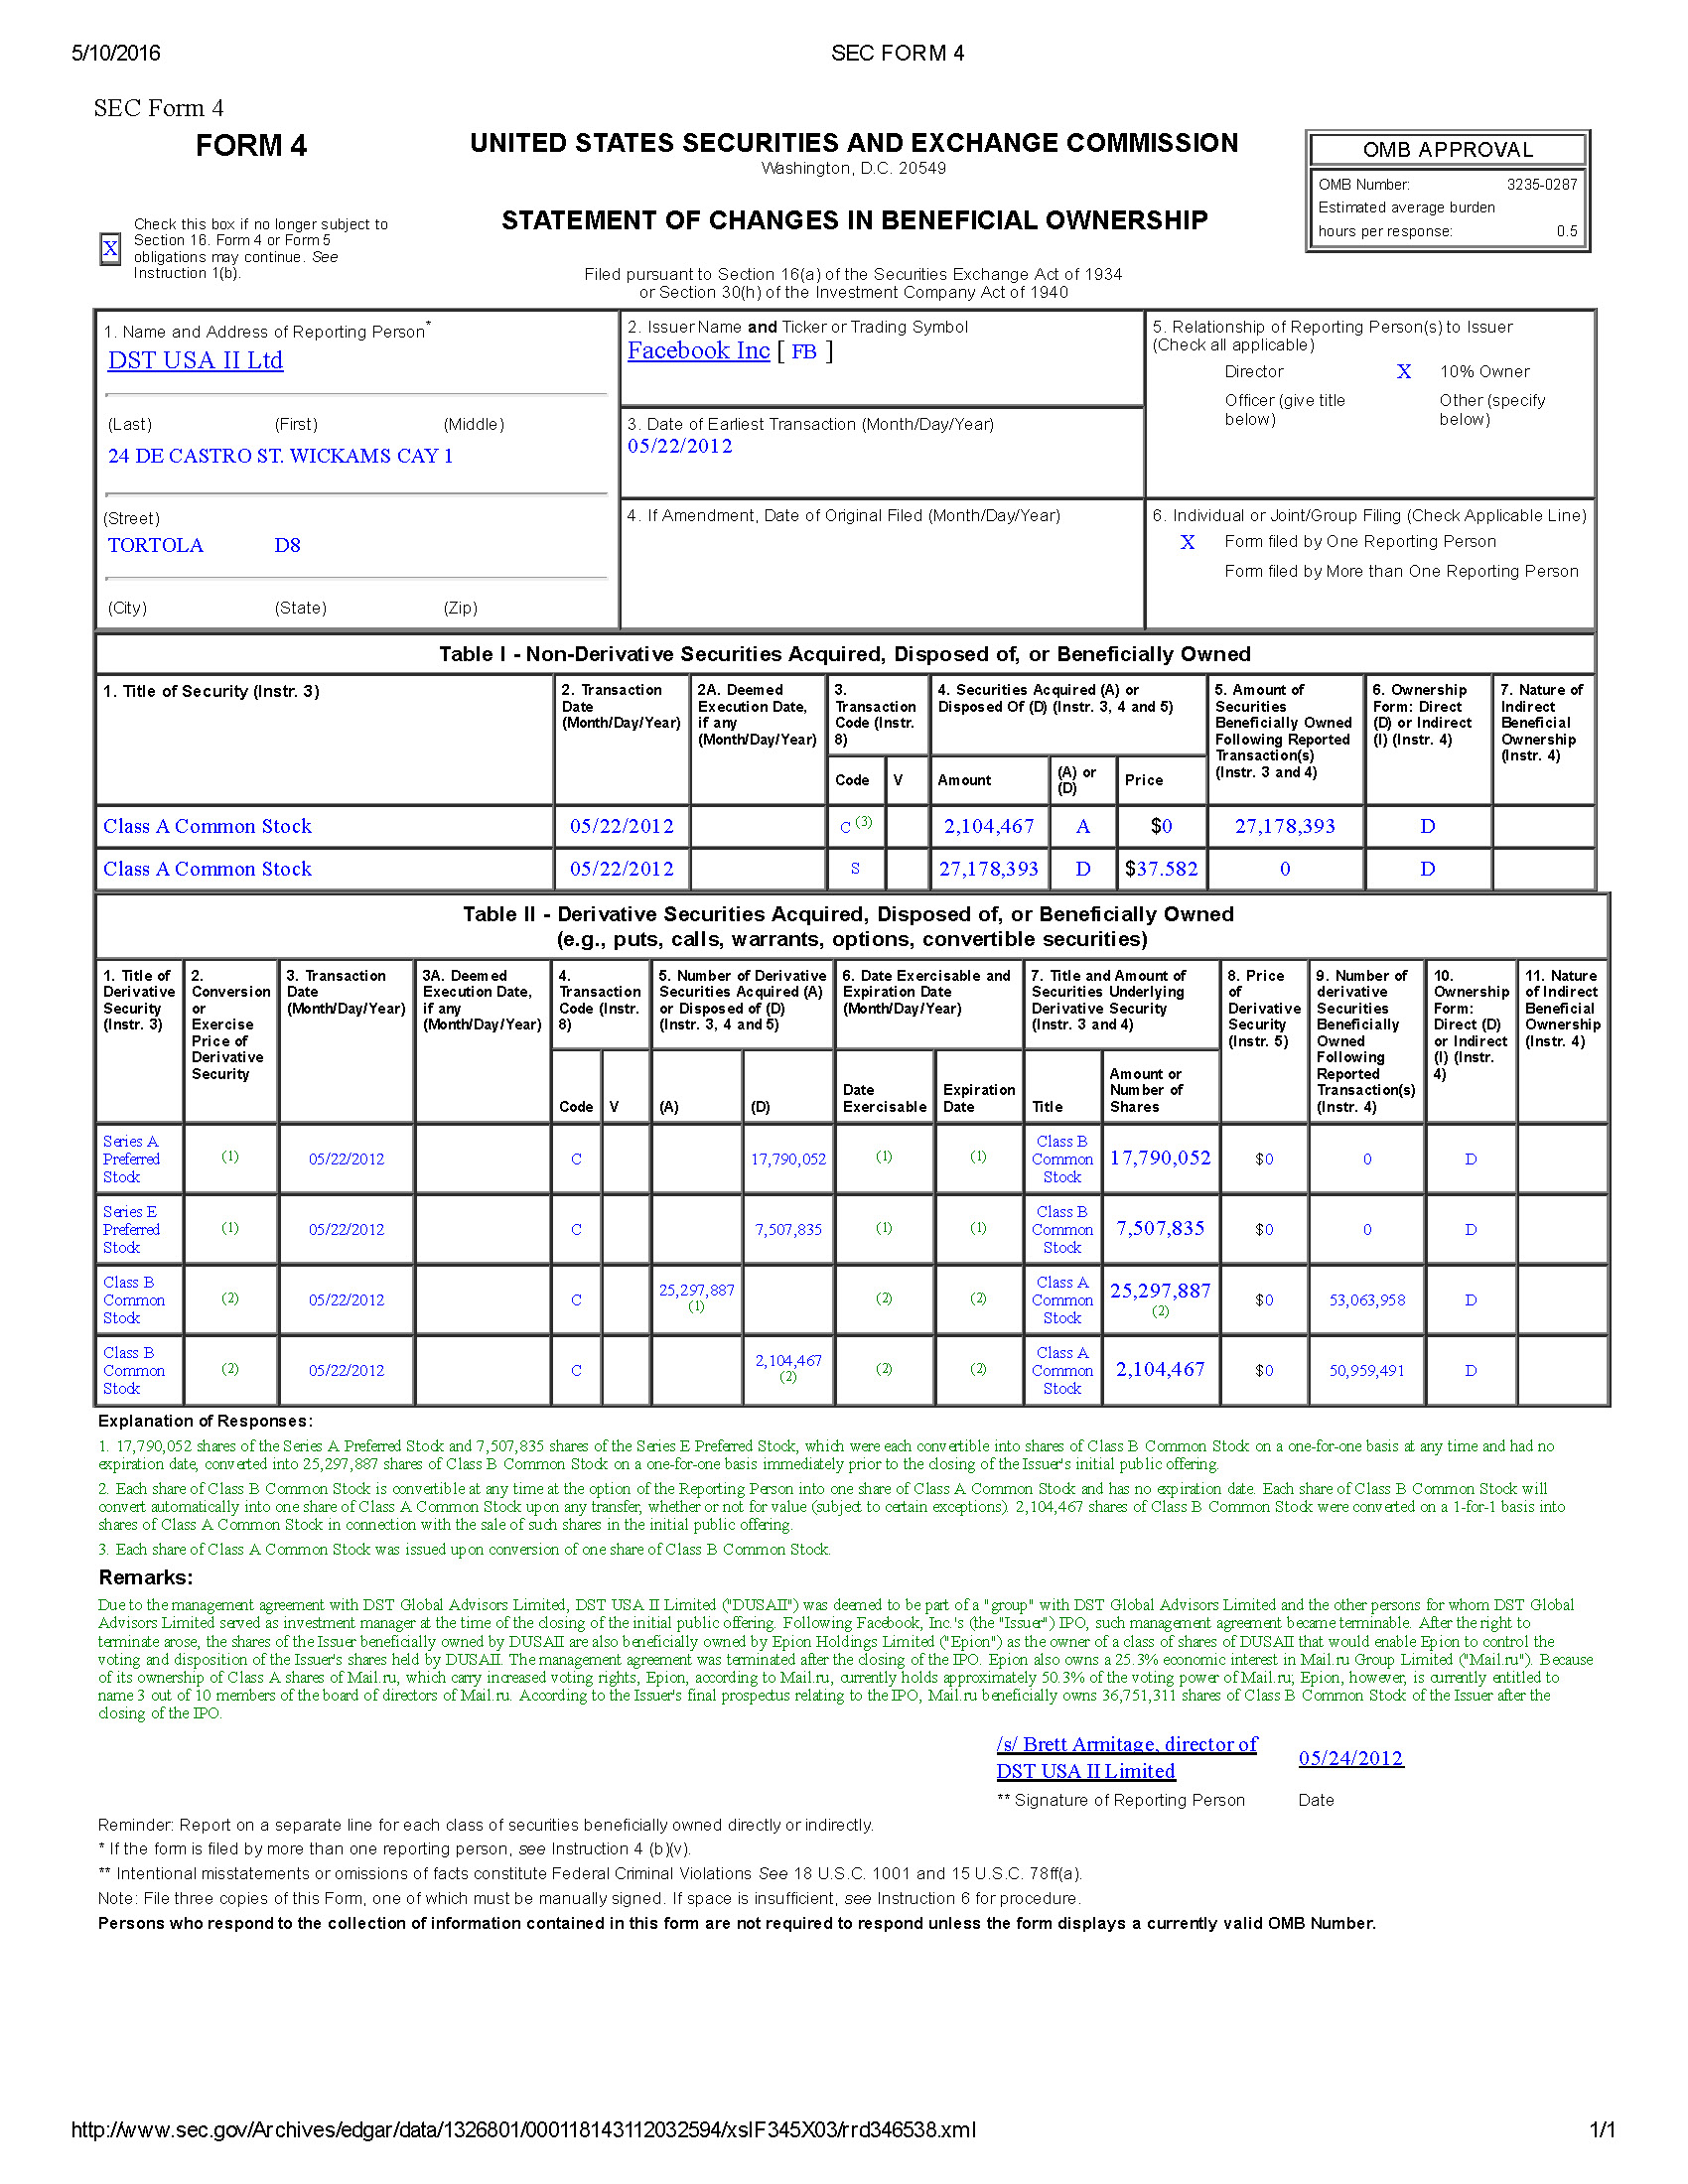 DST USA II Limited. SEC Form 4. Filed May 24, 2012. US Securities & Exchange Commision EDGAR.